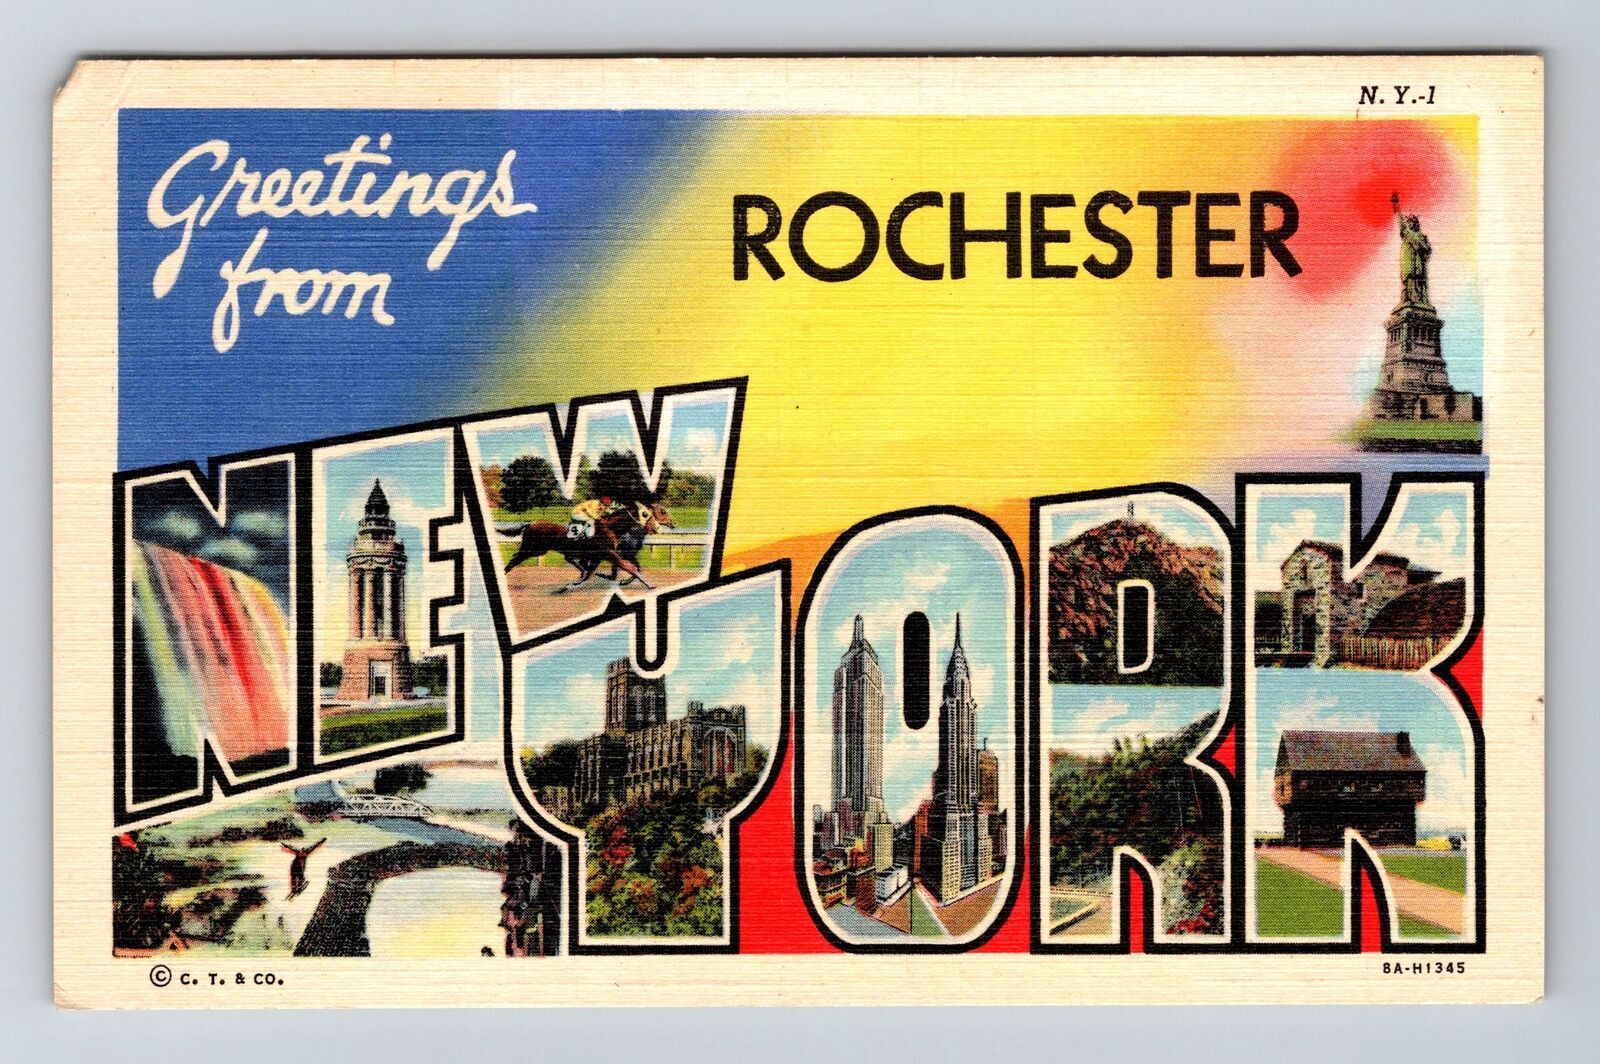 Rochester NY-New York, LARGE LETTER Greetings Vintage Souvenir Postcard